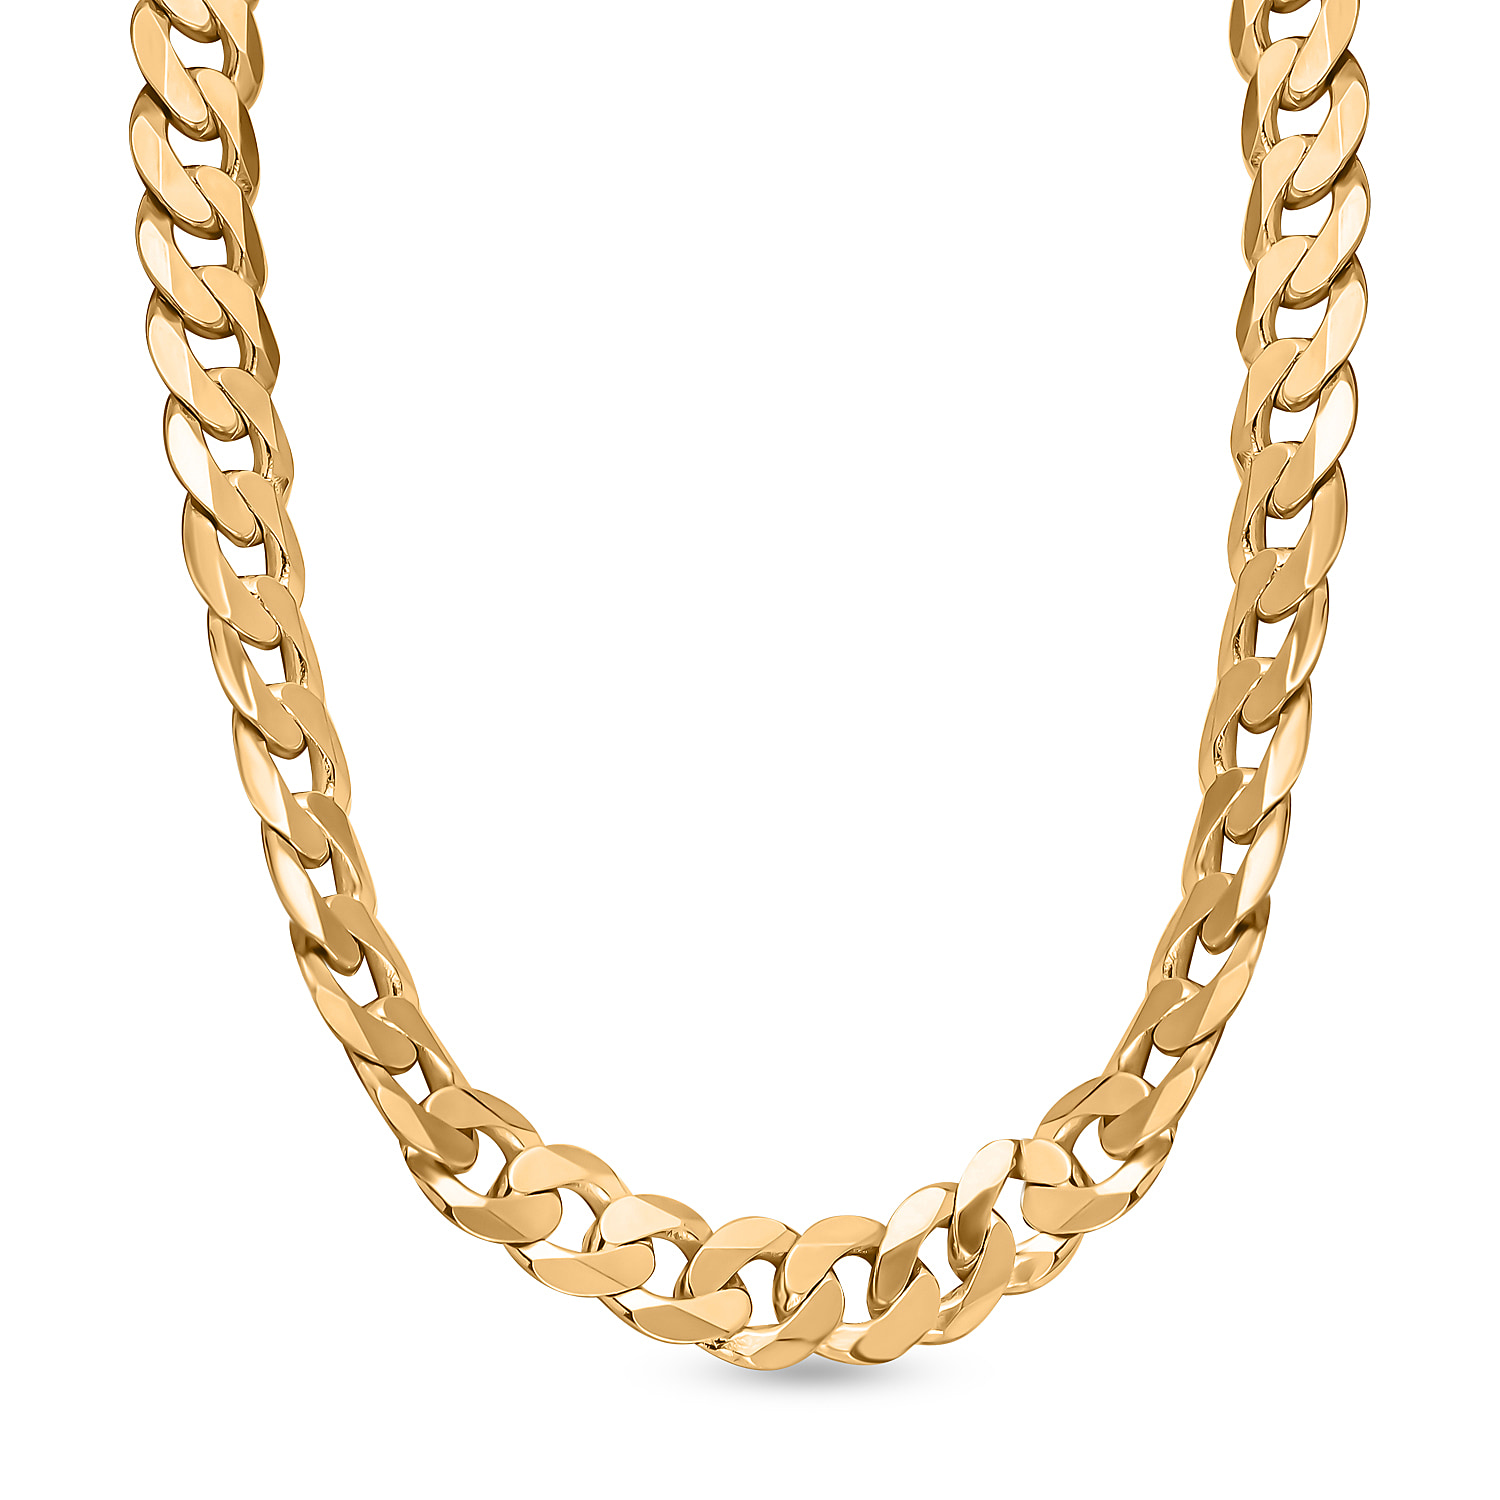 One Time Closeout - Limited Edition - 9K Yellow Gold Diamond Cut Solid Curb Necklace (Size - 20), Gold Wt. 33.02 Gms